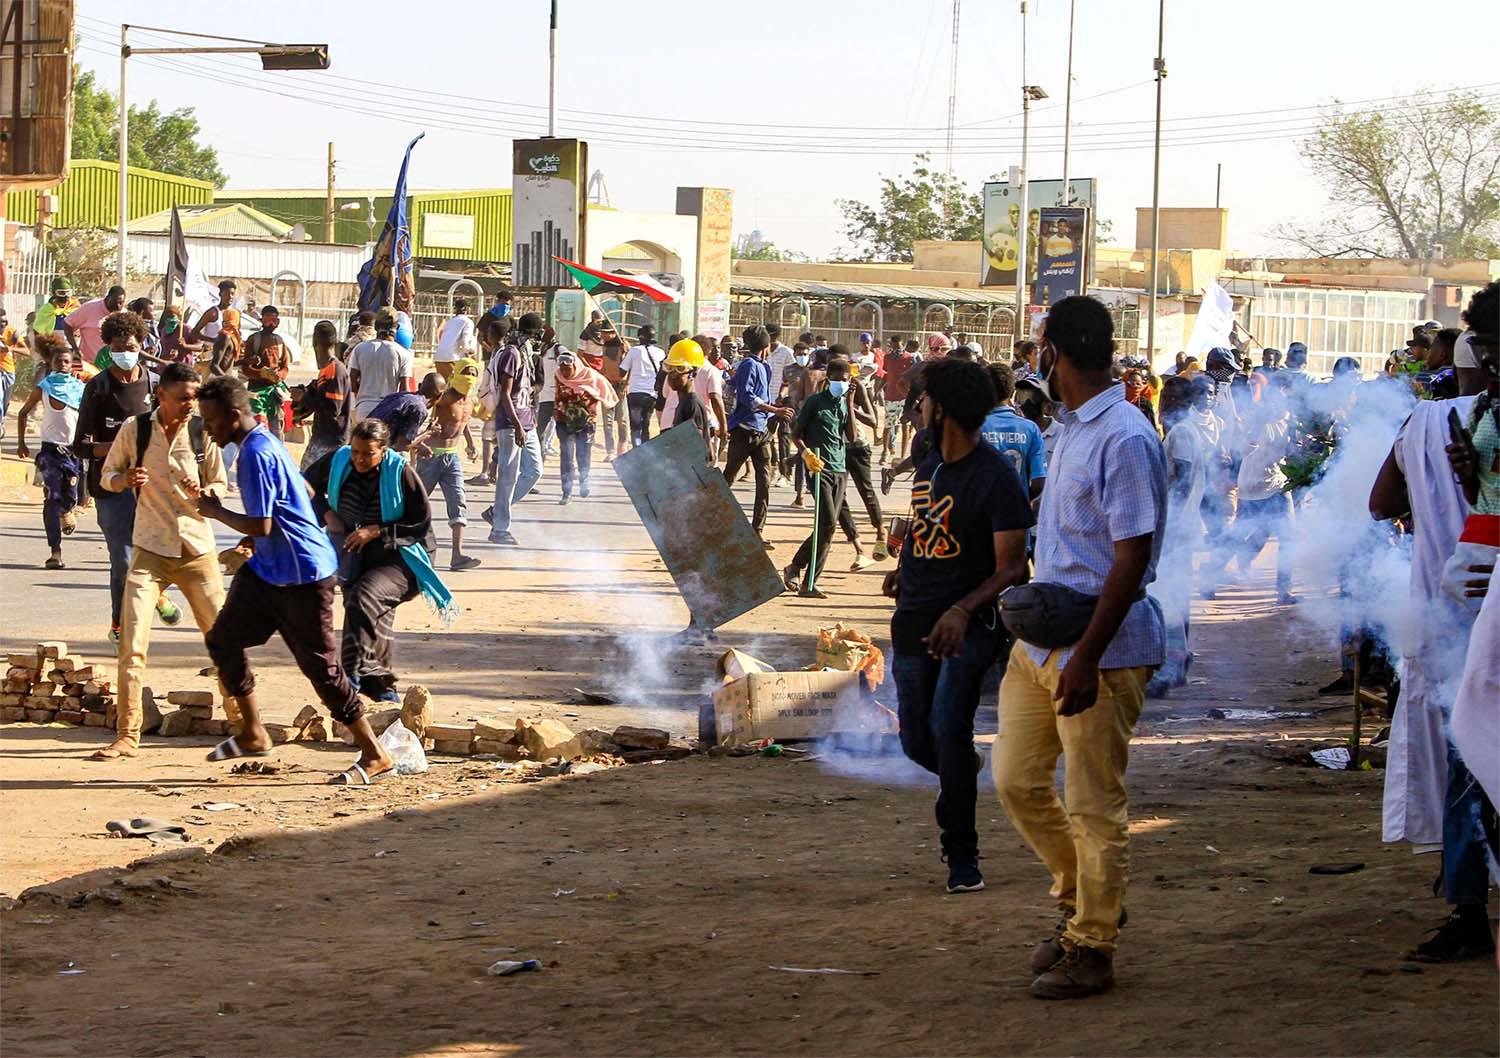 Sudanse security forces fire tear gas on protesters during a protest calling for civilian rule on Nov. 30